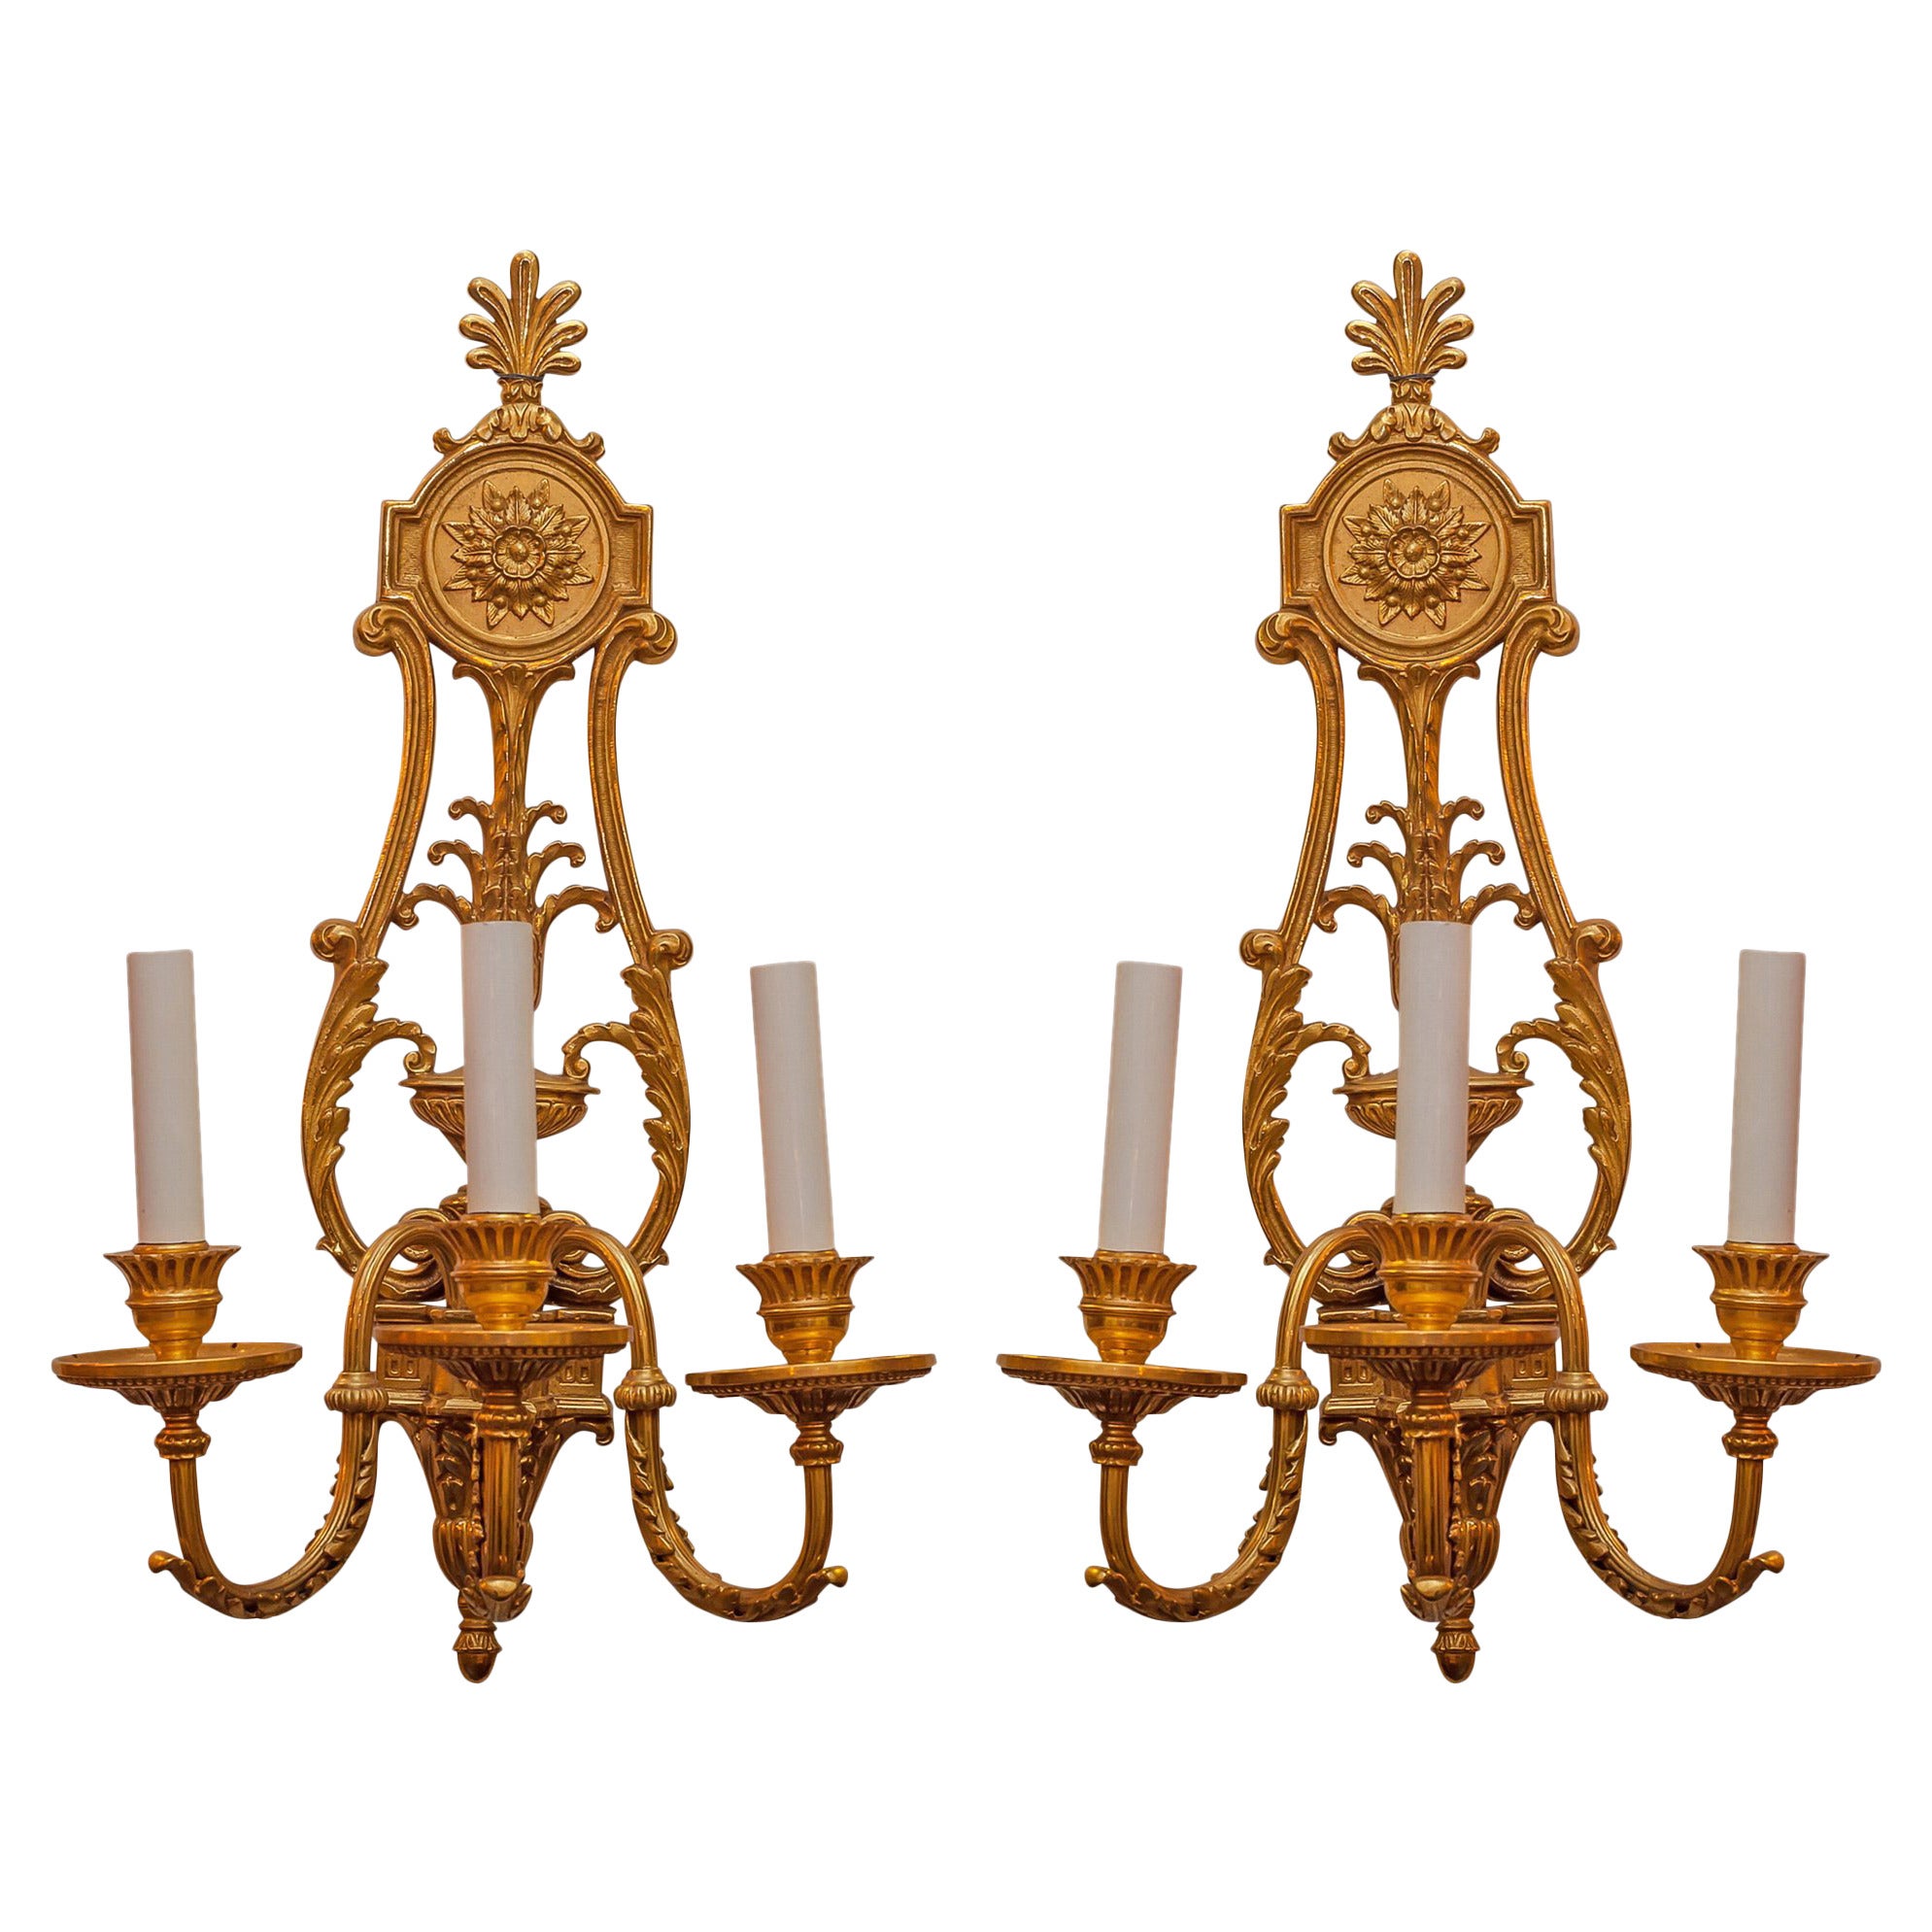 Pair of Gilt Bronze Louis XVI Style Three-Arm Wall Light Sconces For Sale